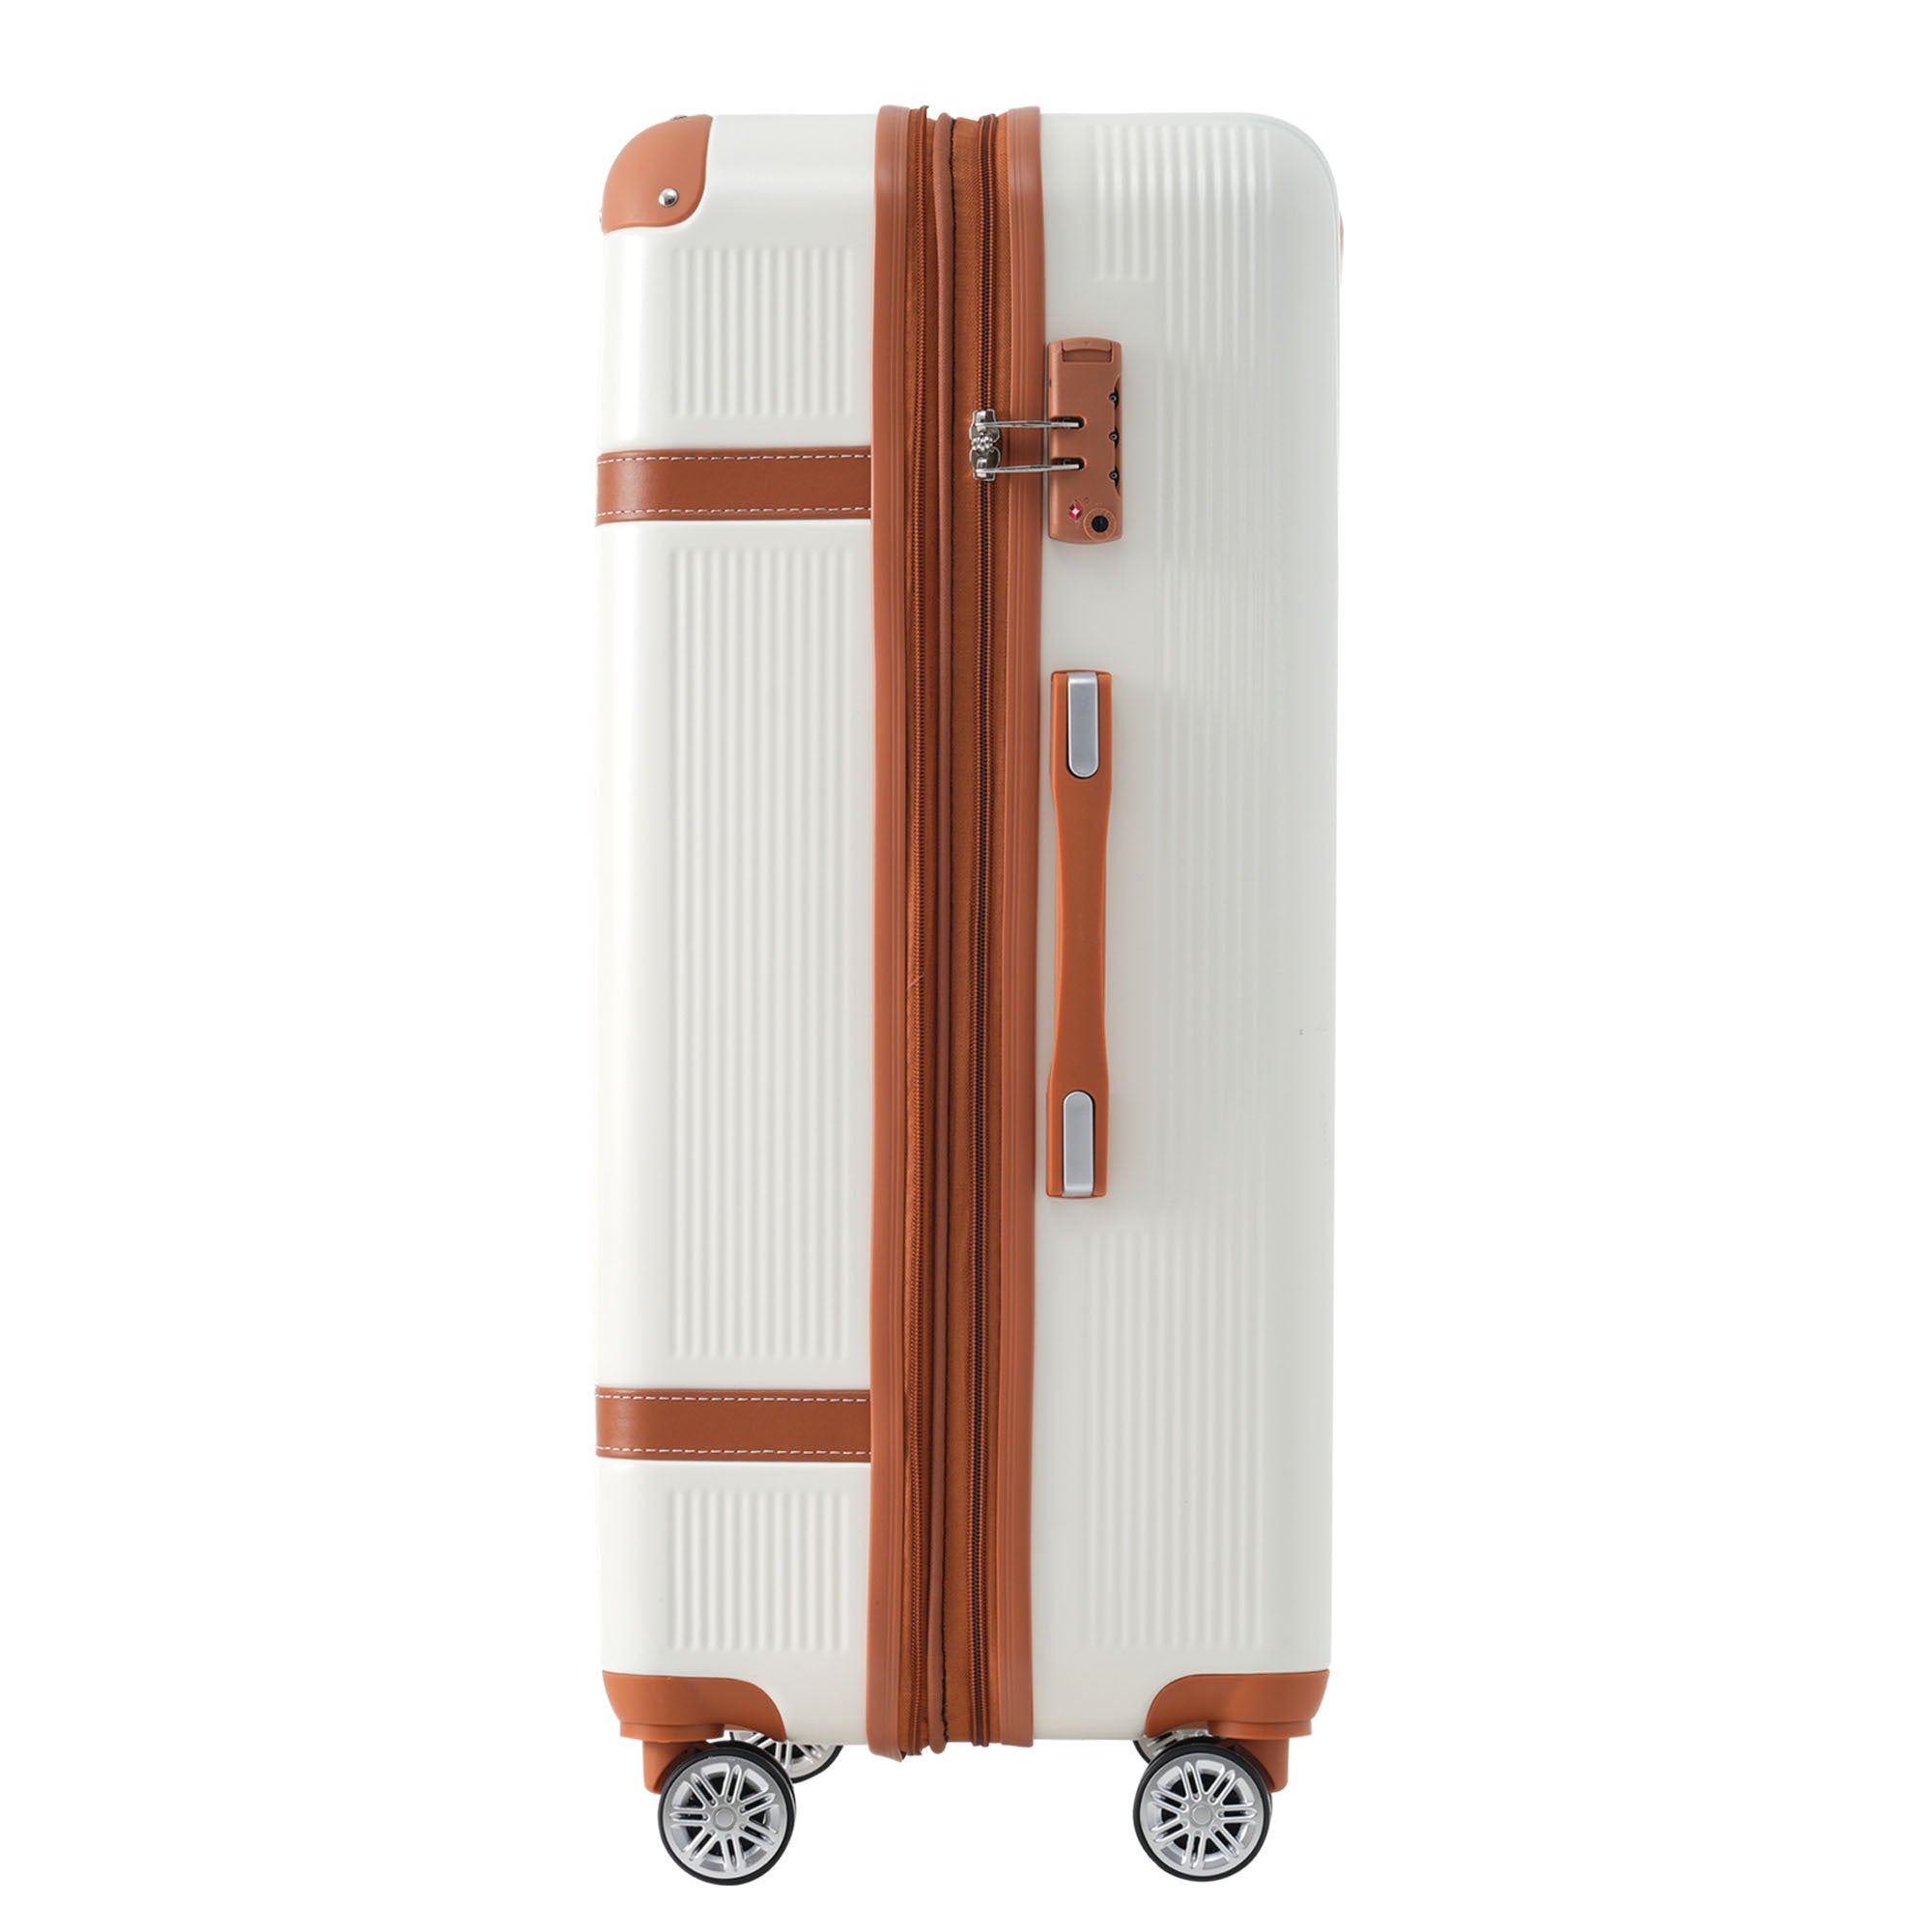 Hardshell Luggage Sets 3 Piece double spinner 8 wheels white-abs